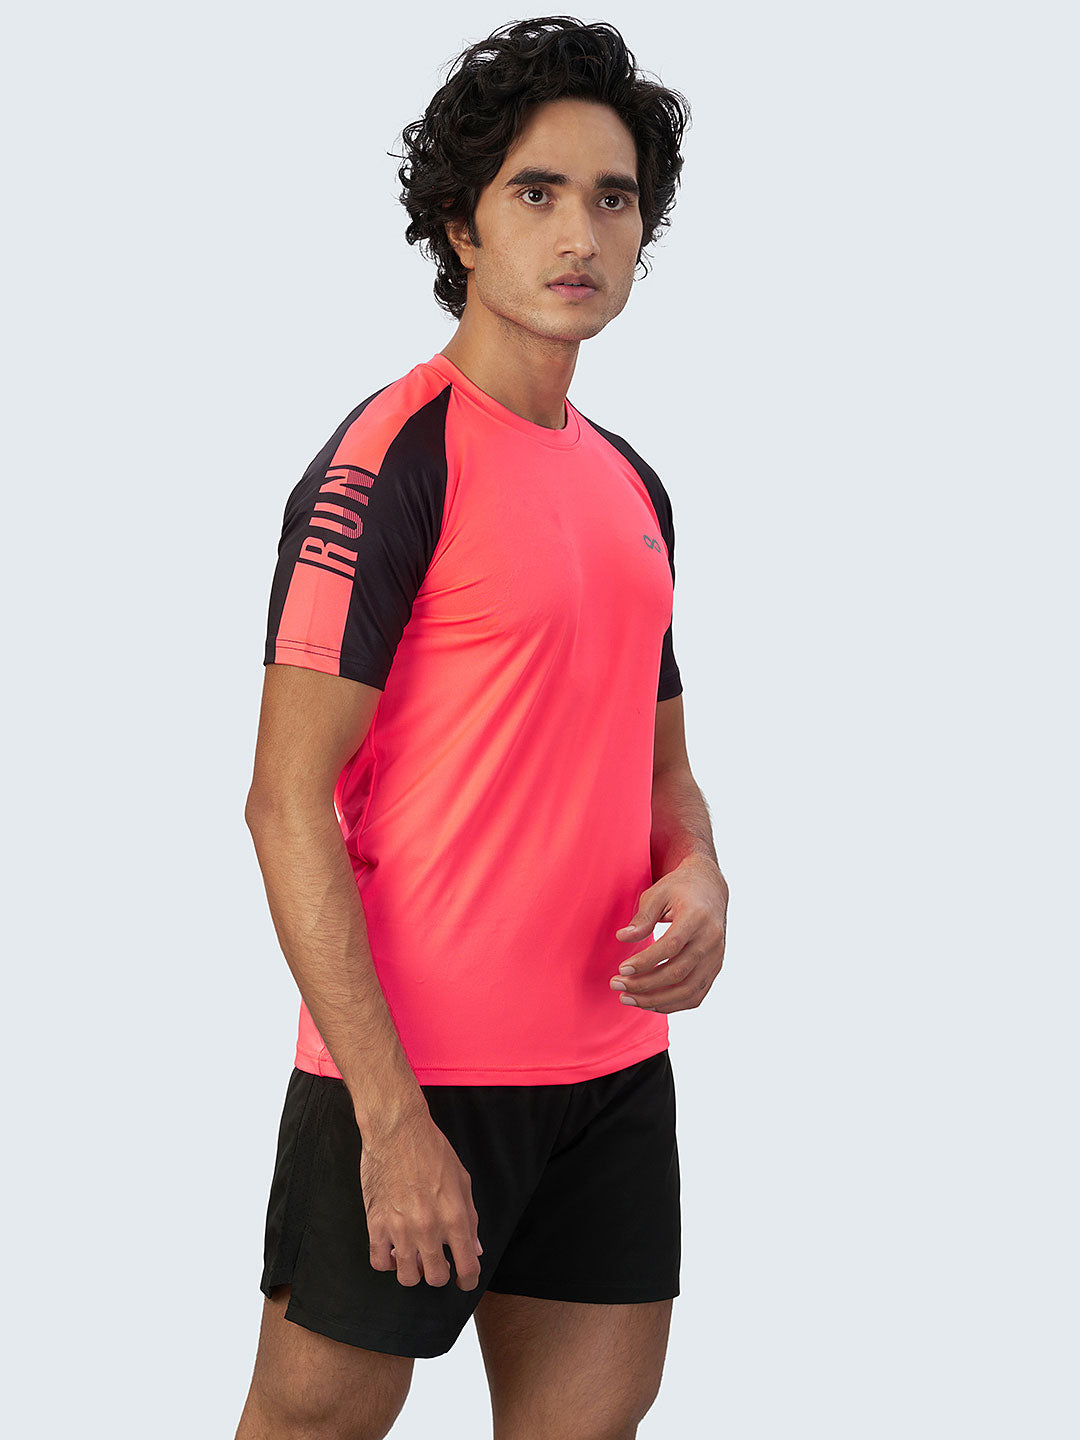 RYRJJ On Clearance Men's Active Quick Dry Crew Neck T Shirts Athletic  Running Gym Workout Short Sleeve Tee Tops Pink M